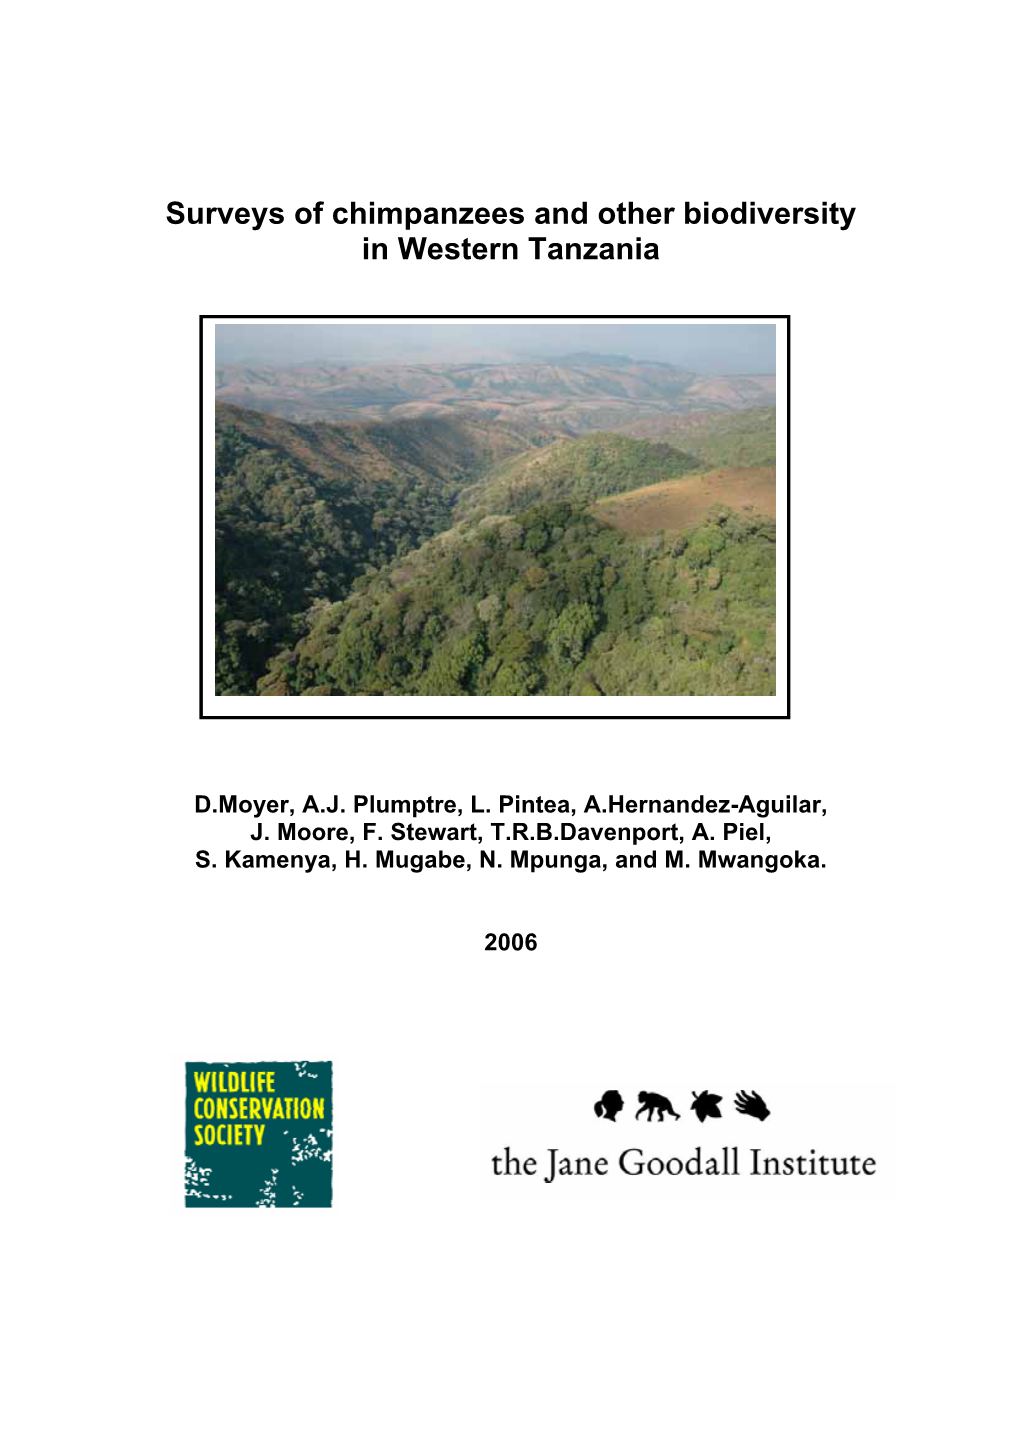 Surveys of Chimpanzees and Other Biodiversity in Western Tanzania